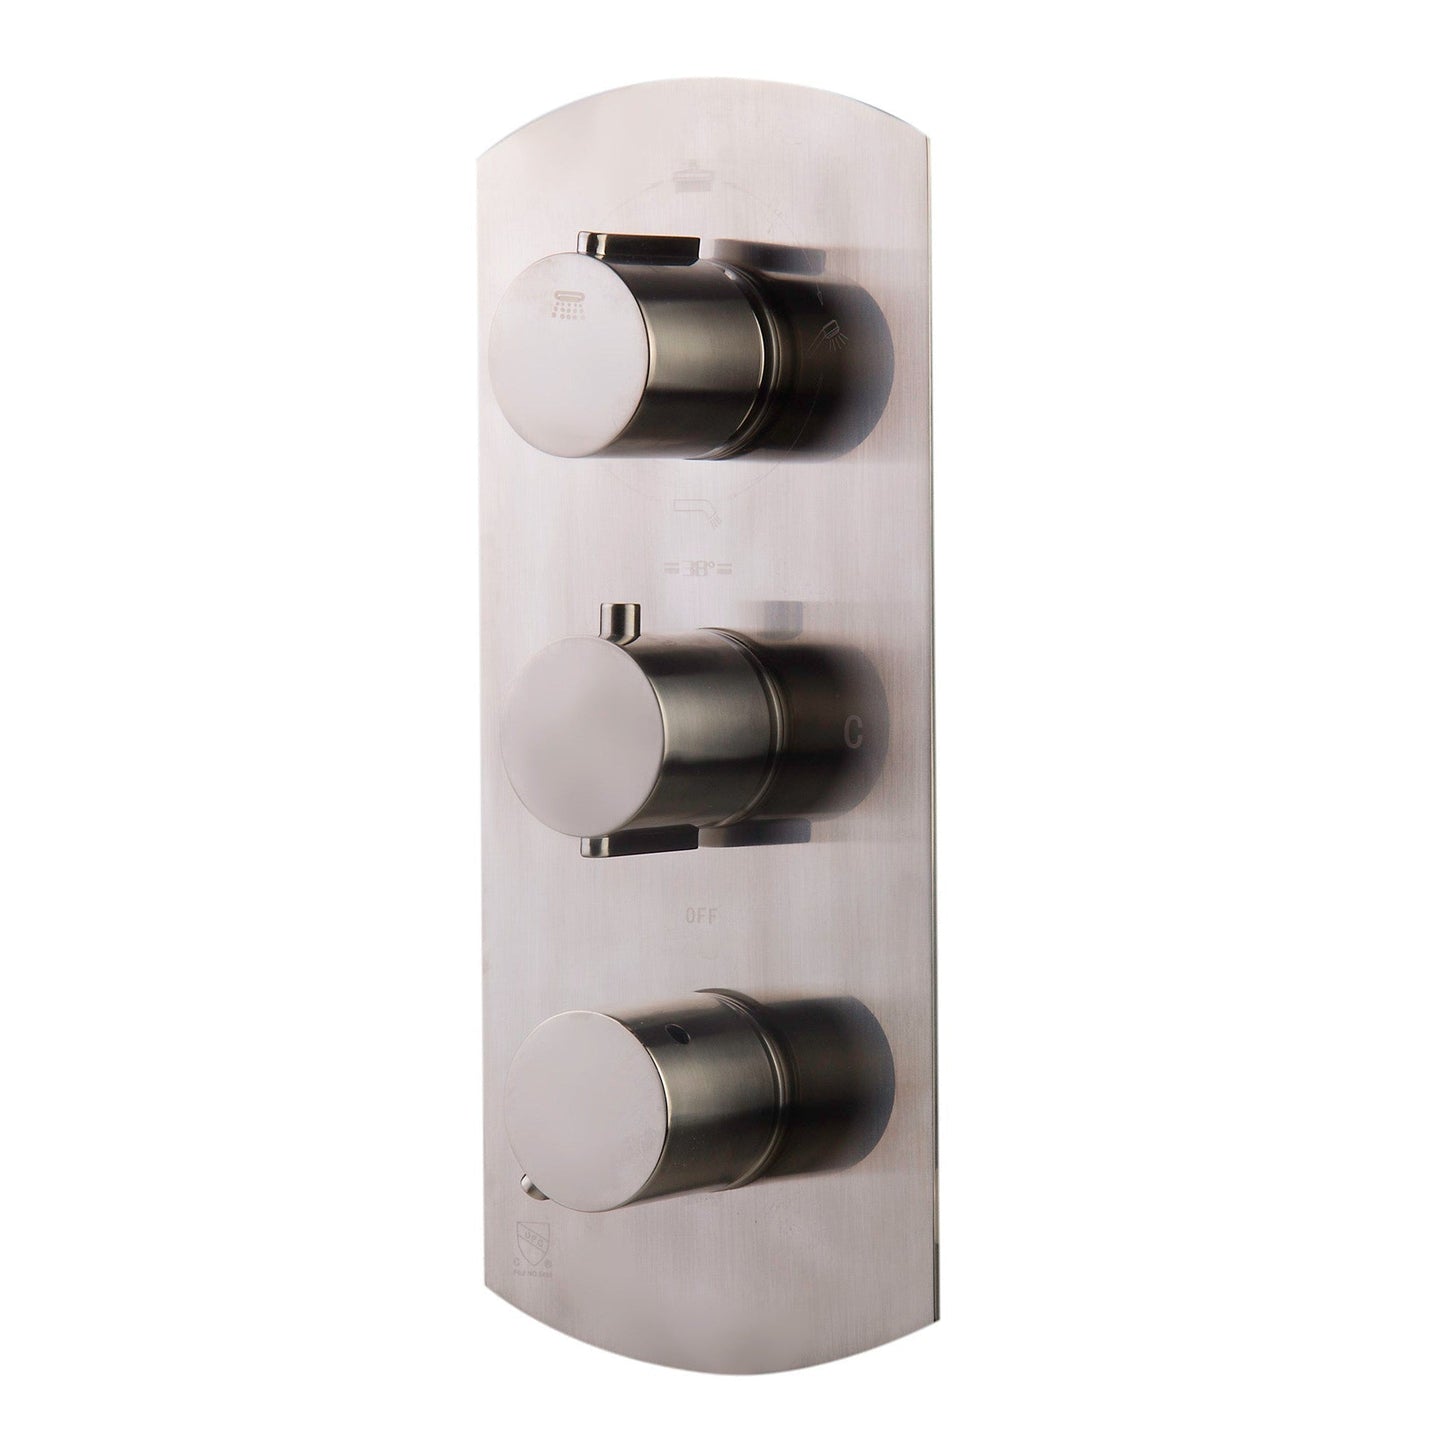 ALFI Brand AB4101-BN Brushed Nickel Concealed 4-Way Thermostatic Valve Shower Mixer With Round Knobs